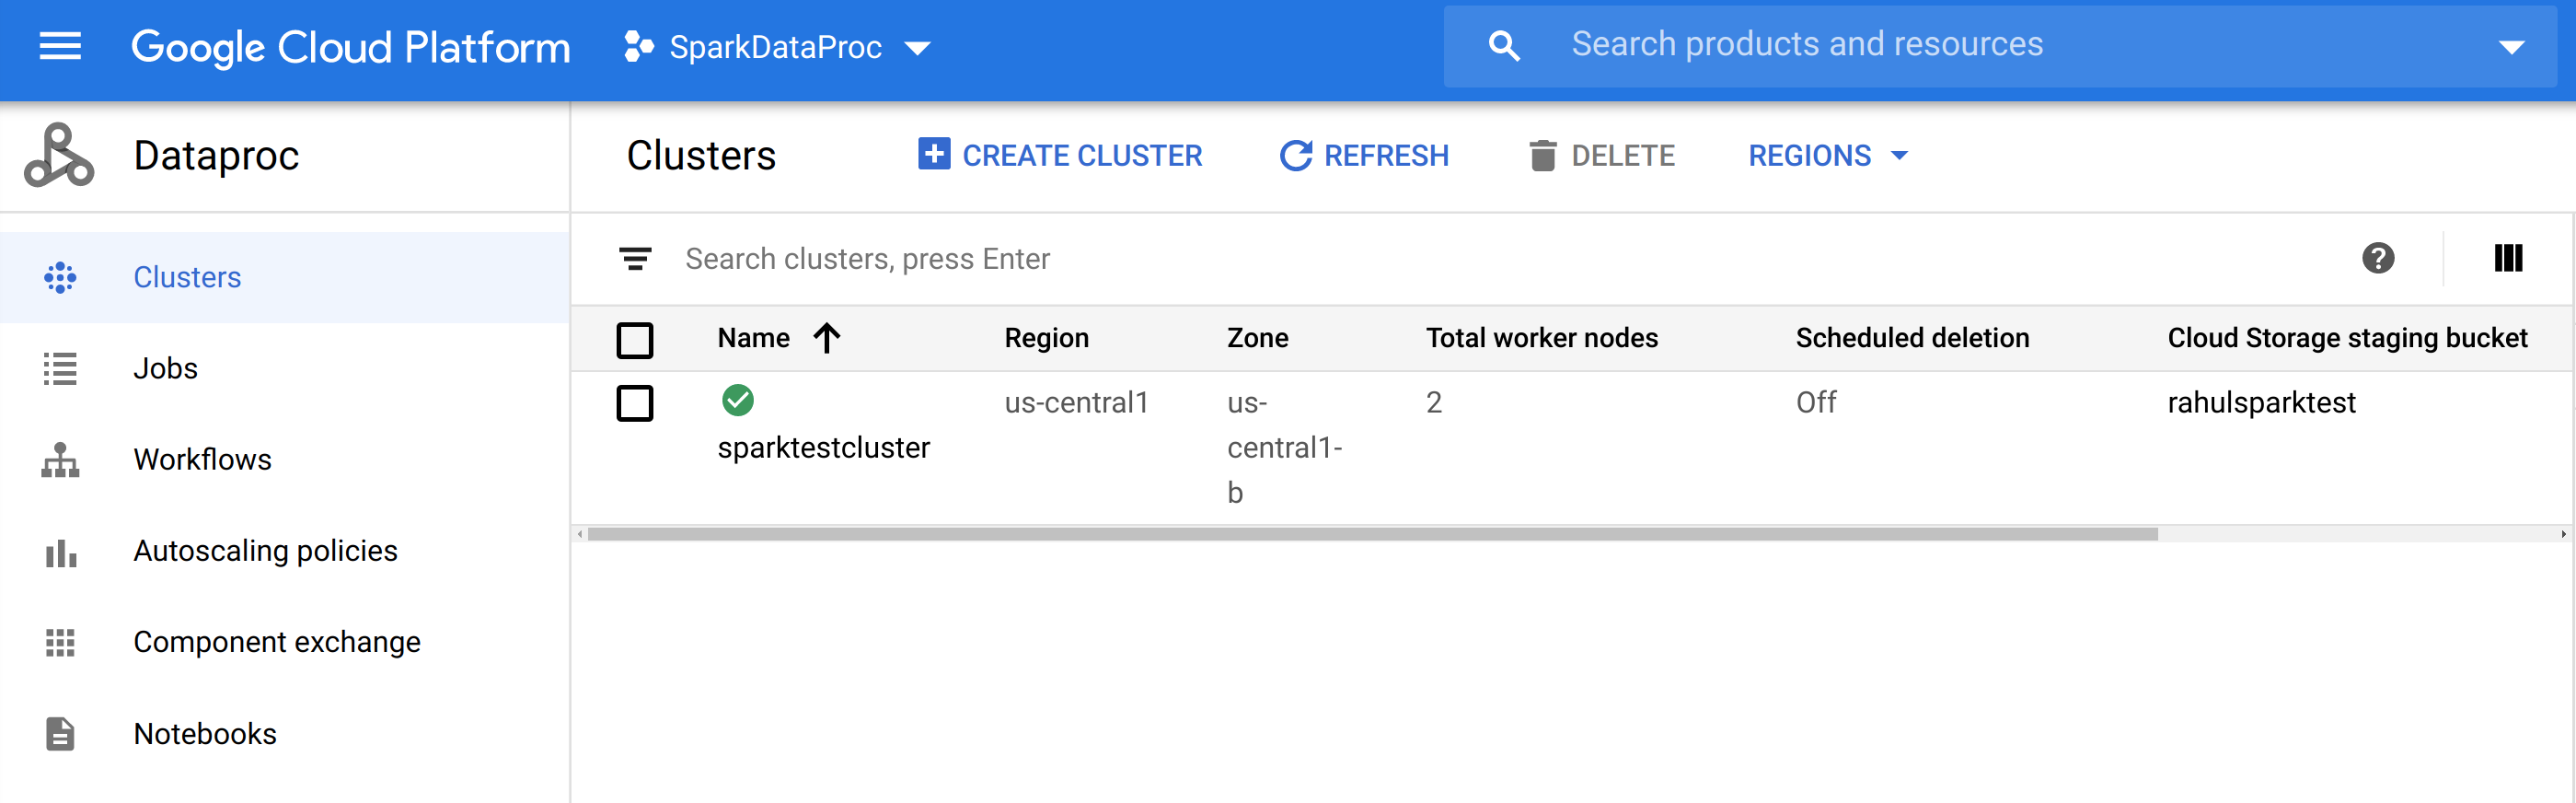 Dataproc Clusters Page